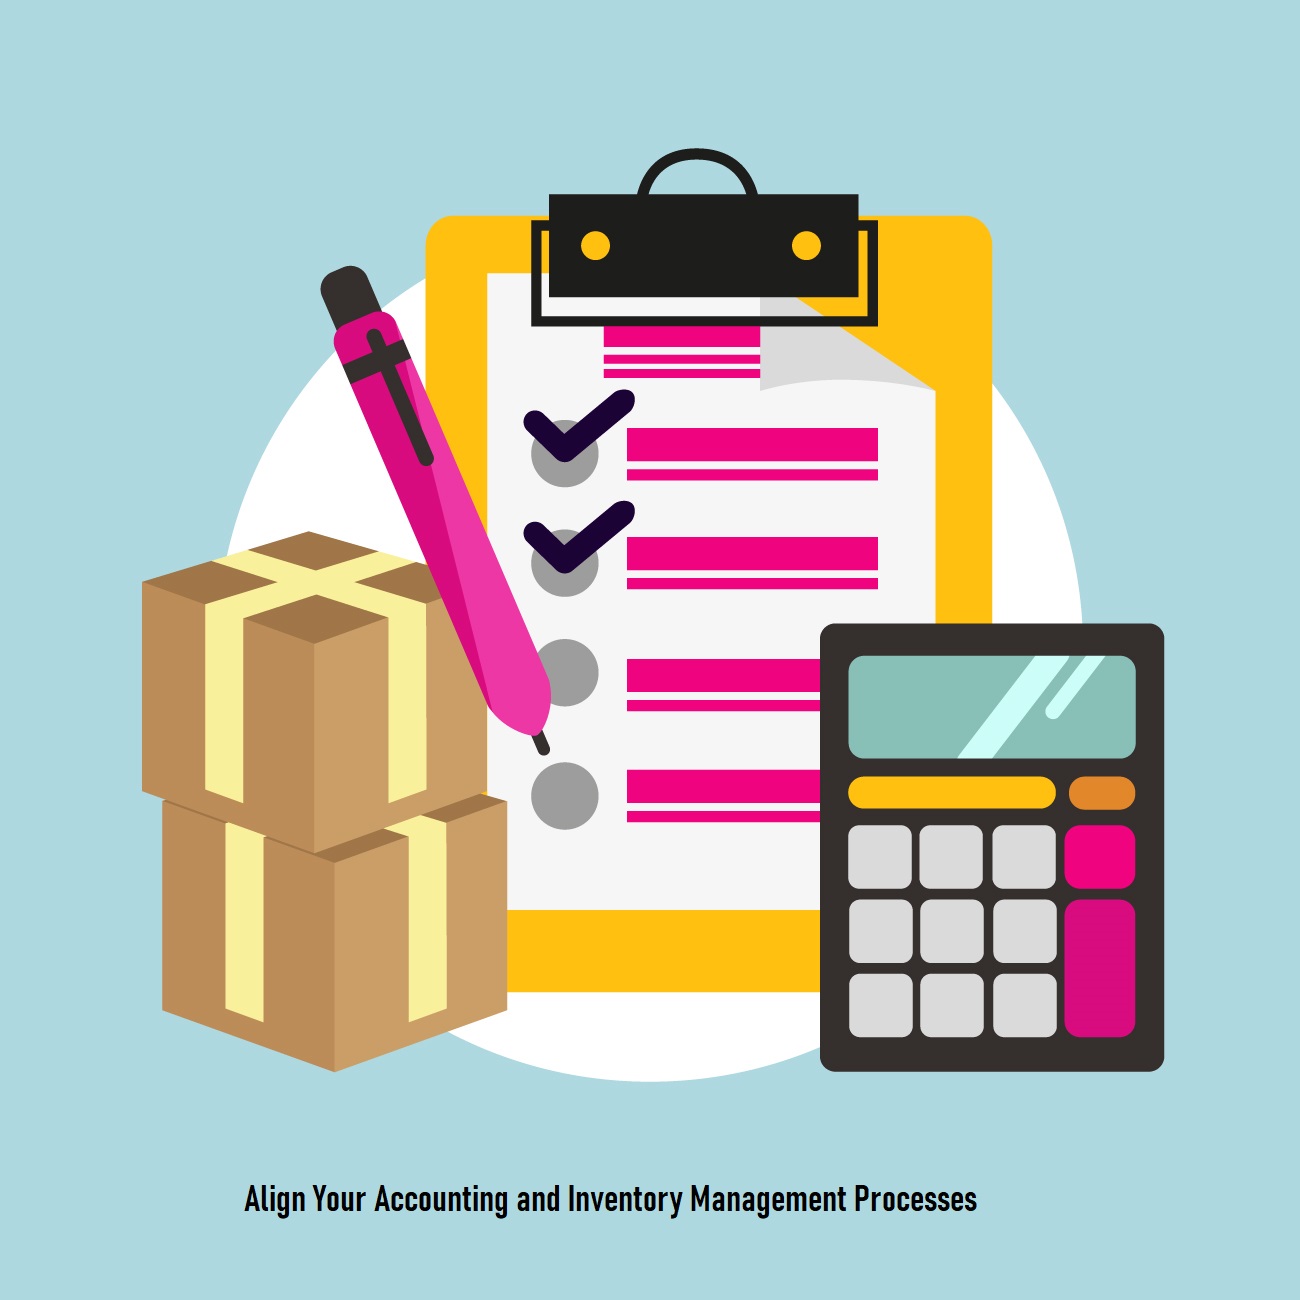 Align Your Accounting and Inventory Management Processes